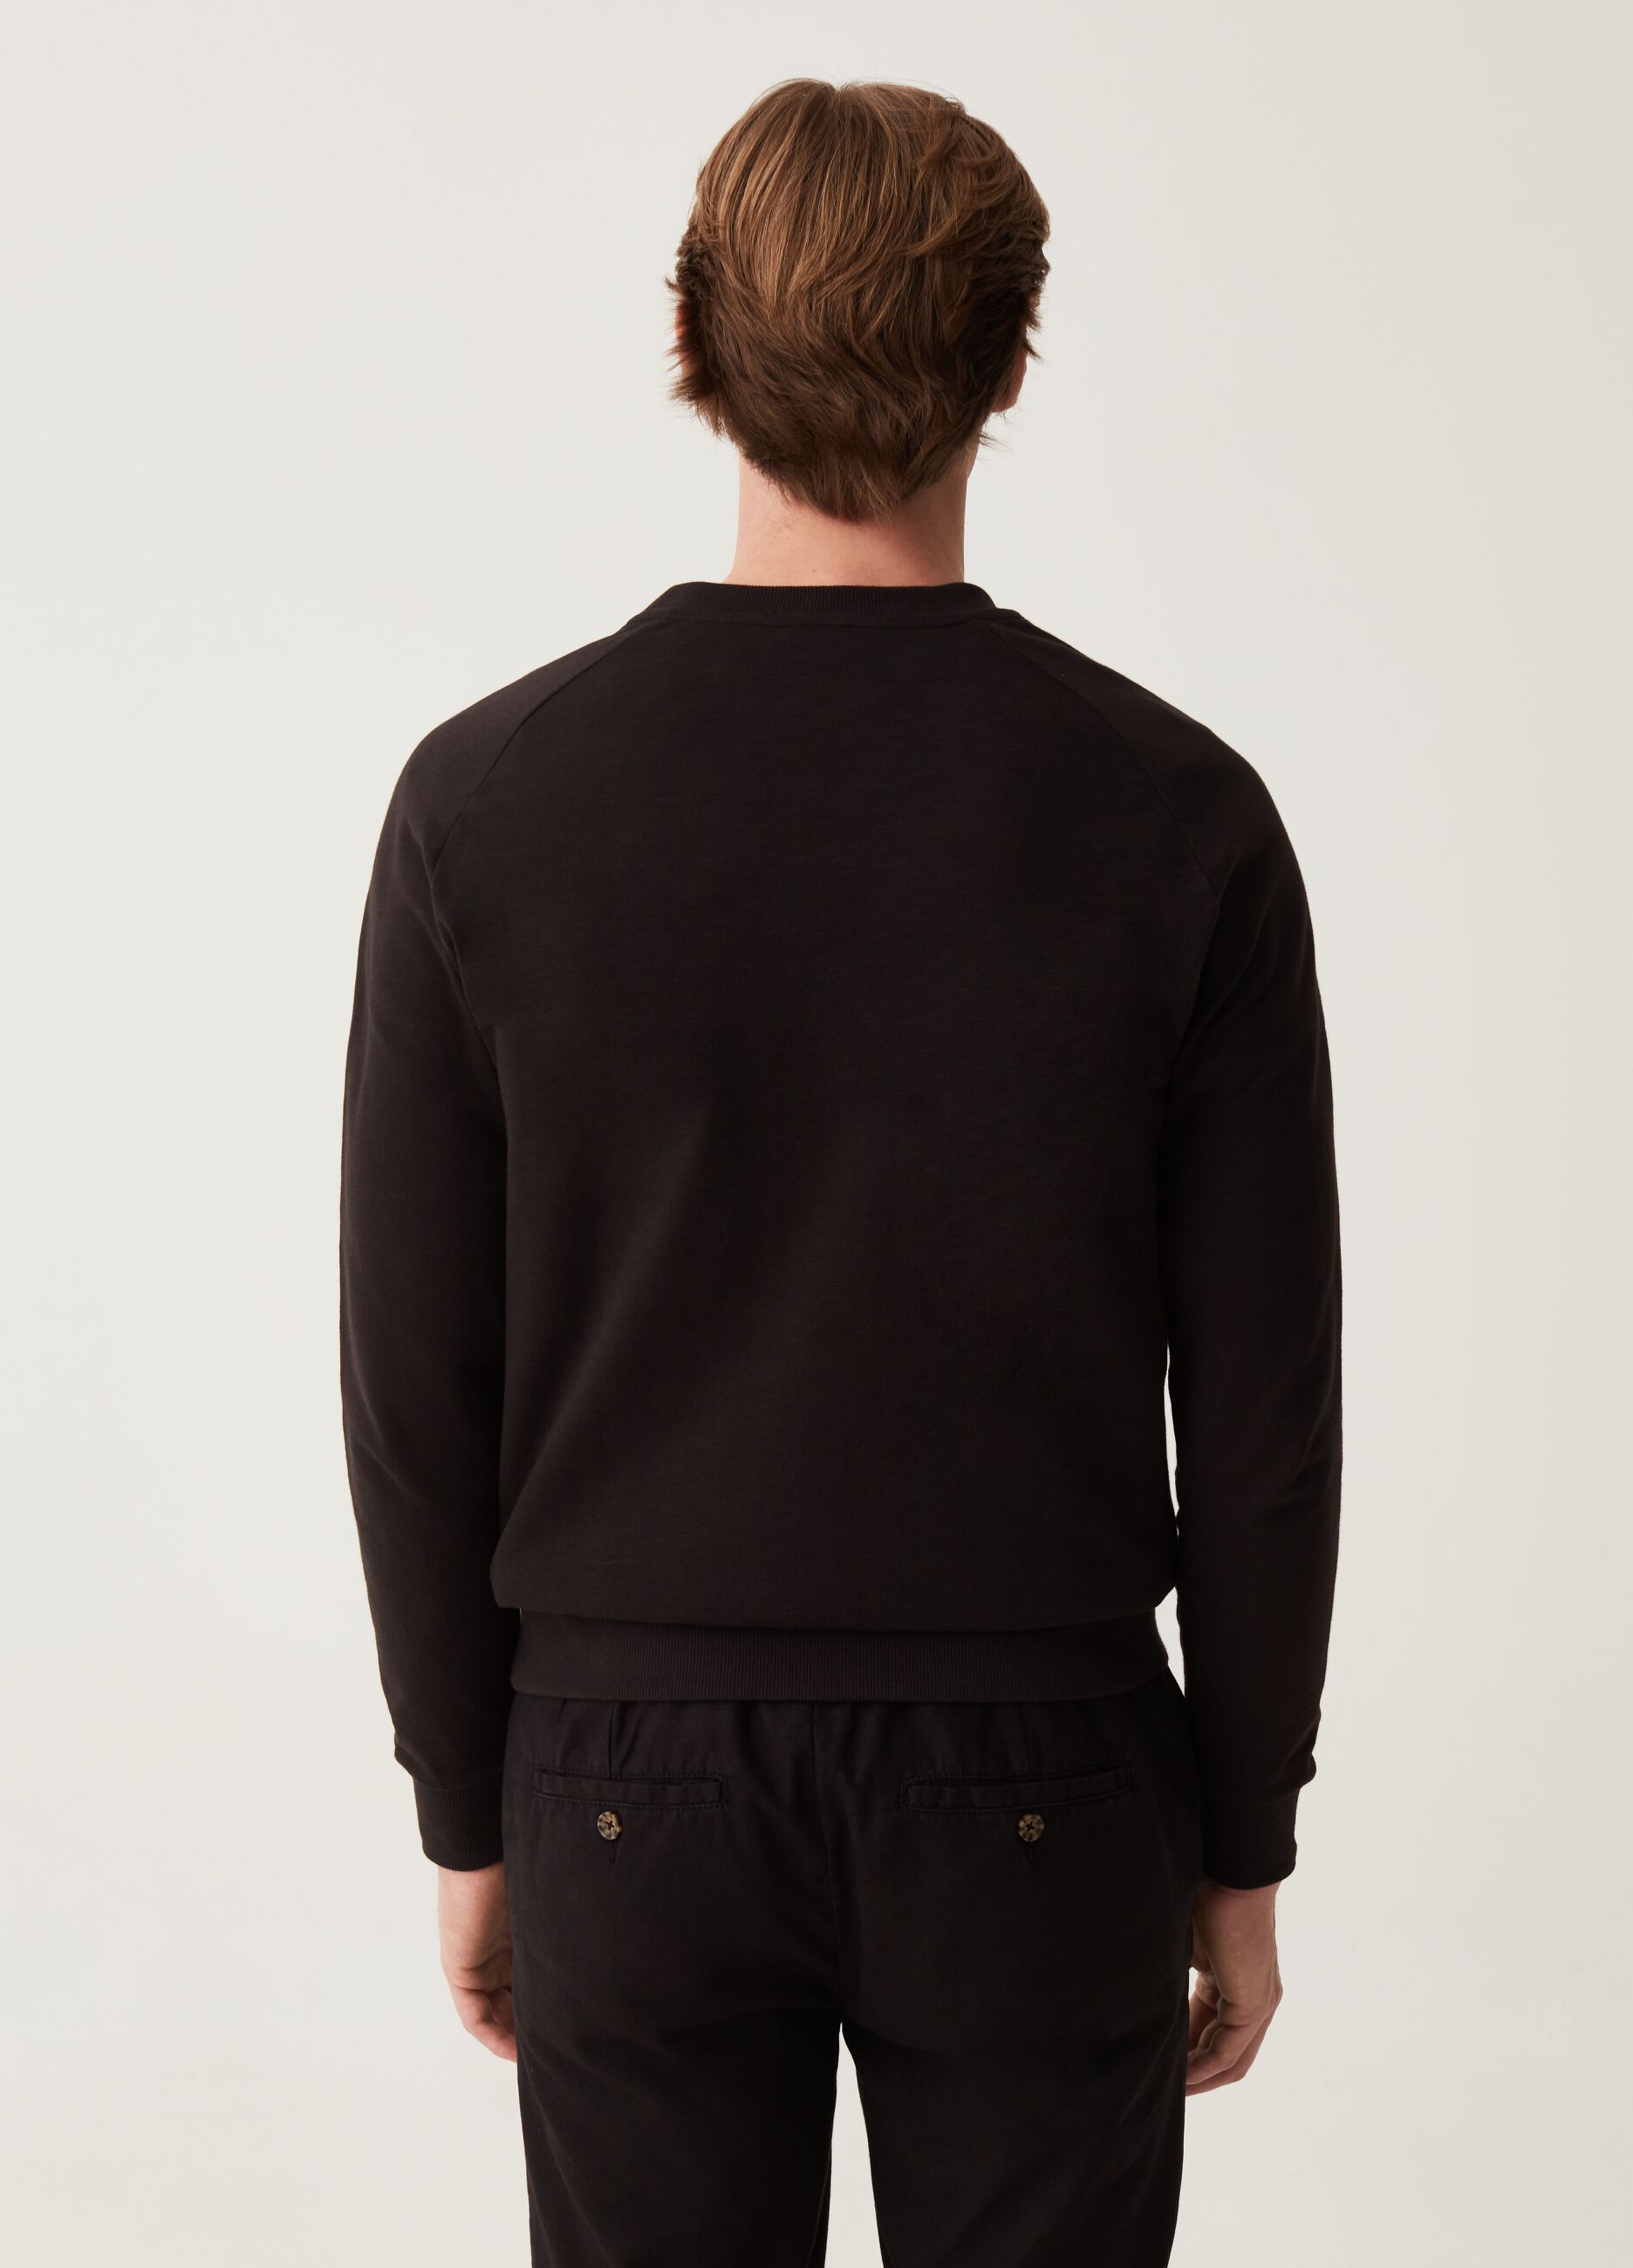 LESS IS BETTER cotton sweatshirt with detail at the neck